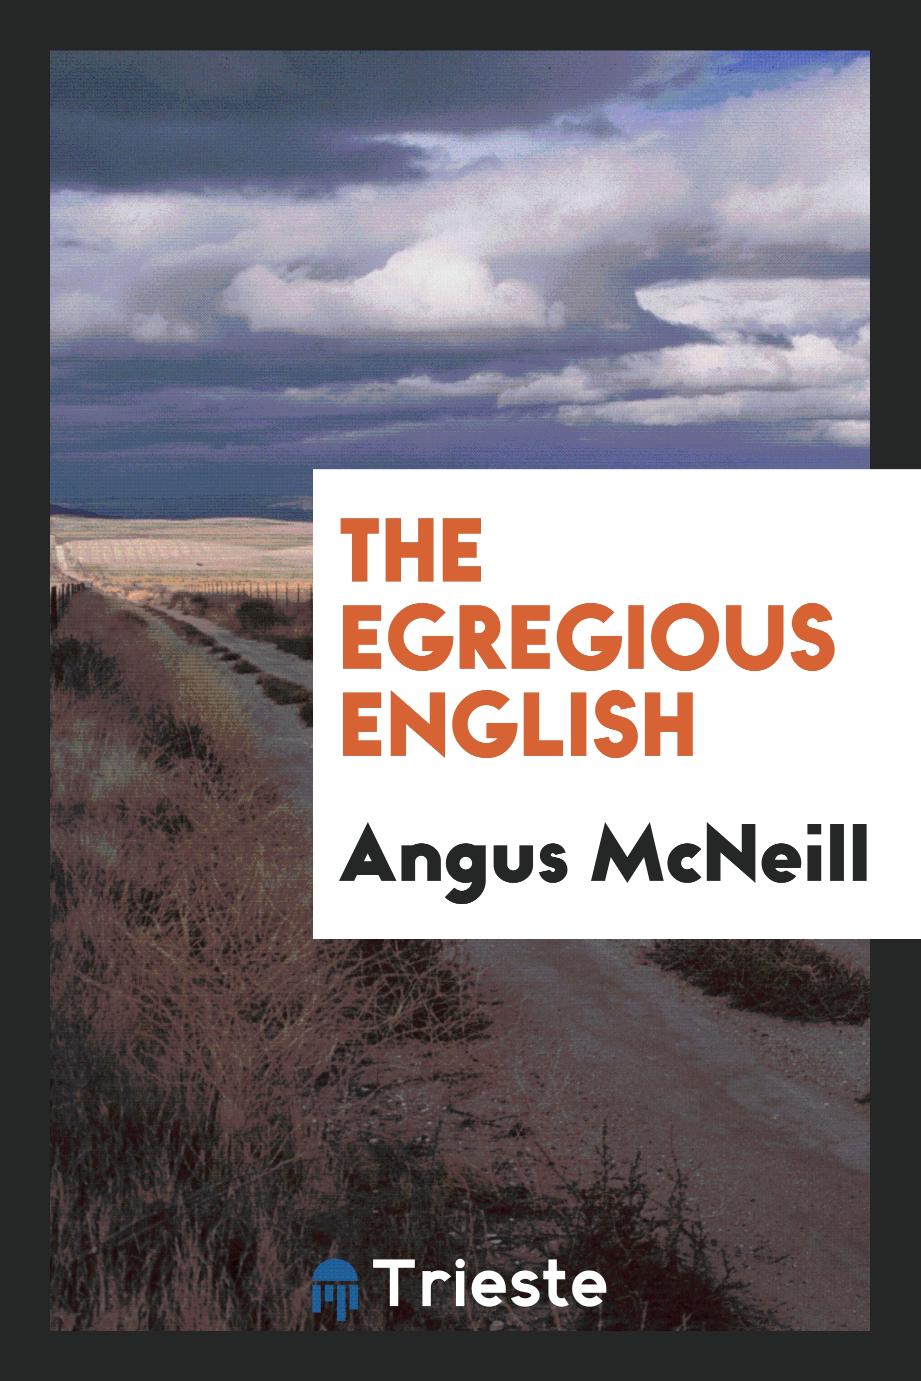 Angus McNeill - The Egregious English